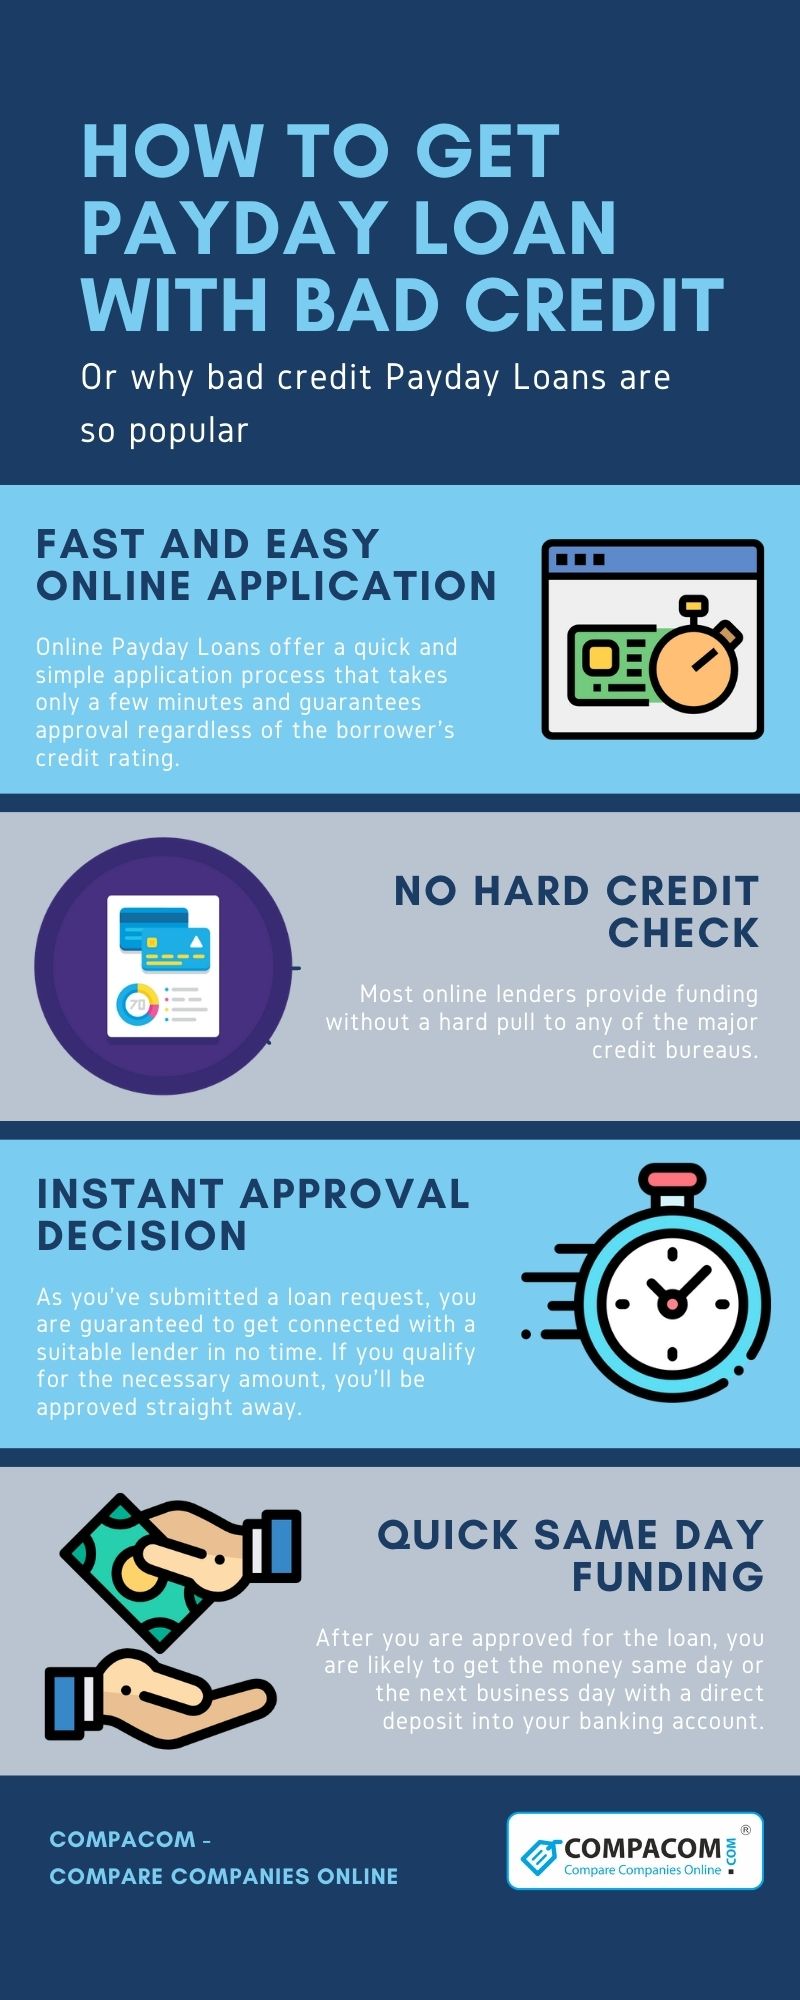 You can get bad credit payday loans online fast and easy. There's no credit check required and you receive the loan on the same day after approval.